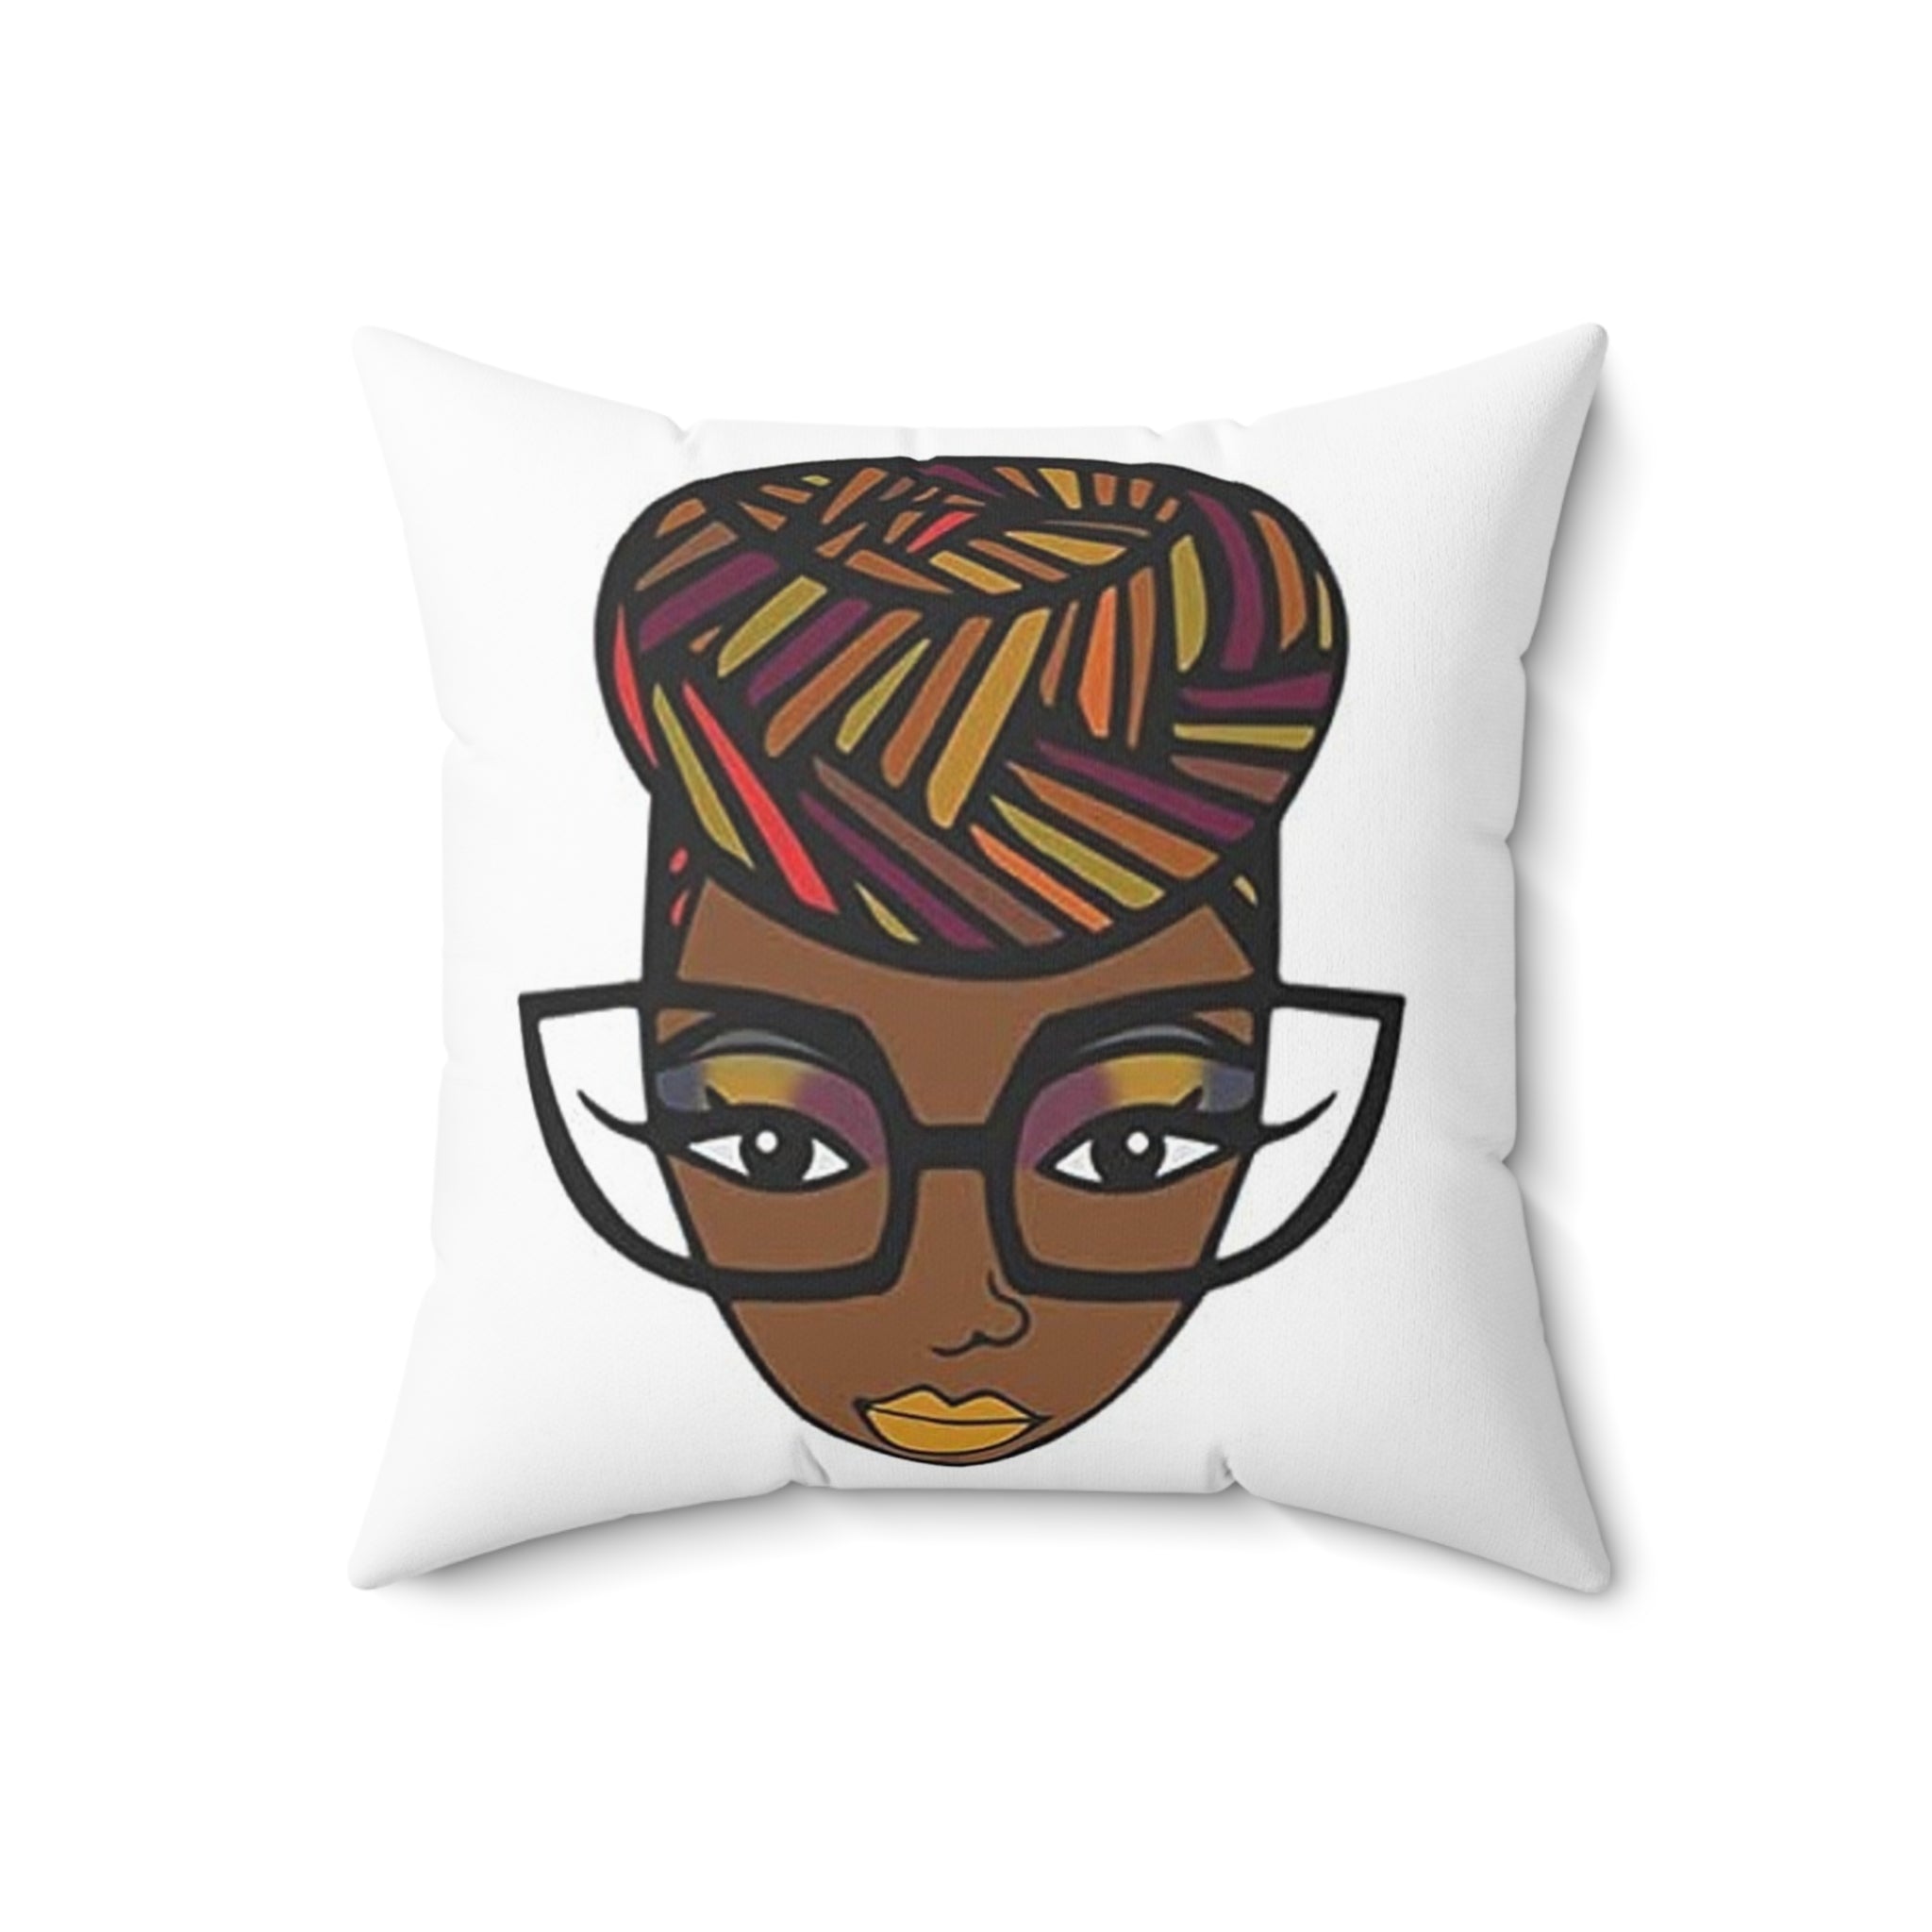 PoP! Pillow Cover - I'm Bossy